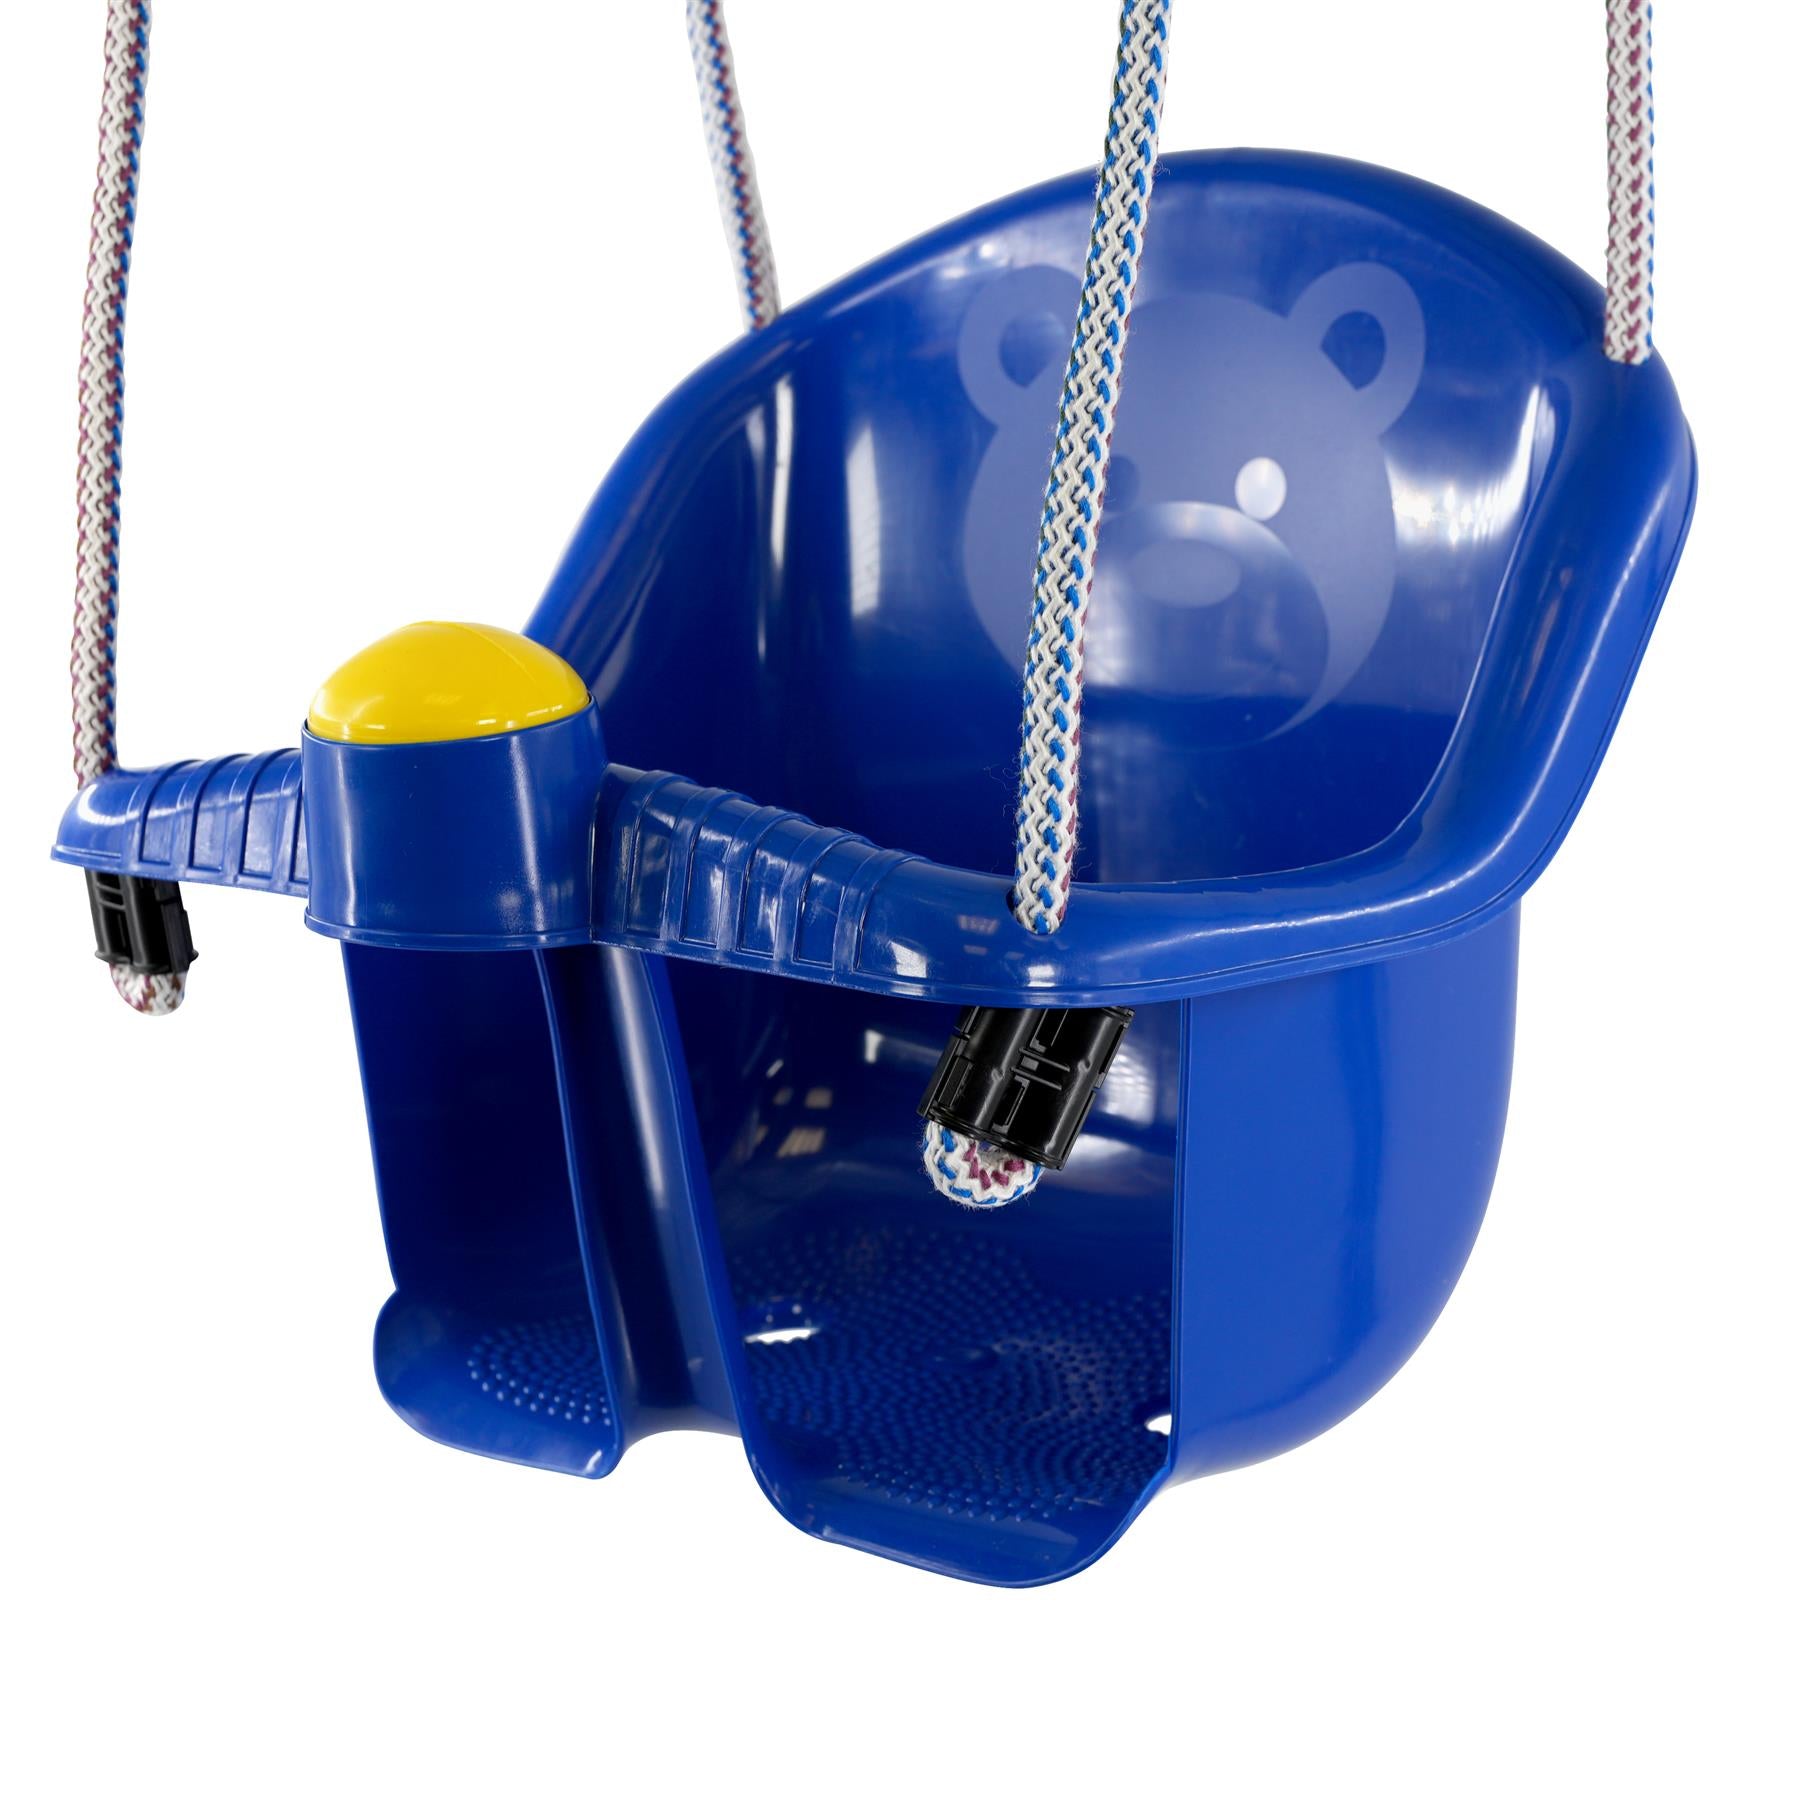 Blue Children's Safety Swing Seat by MTS - The Magic Toy Shop